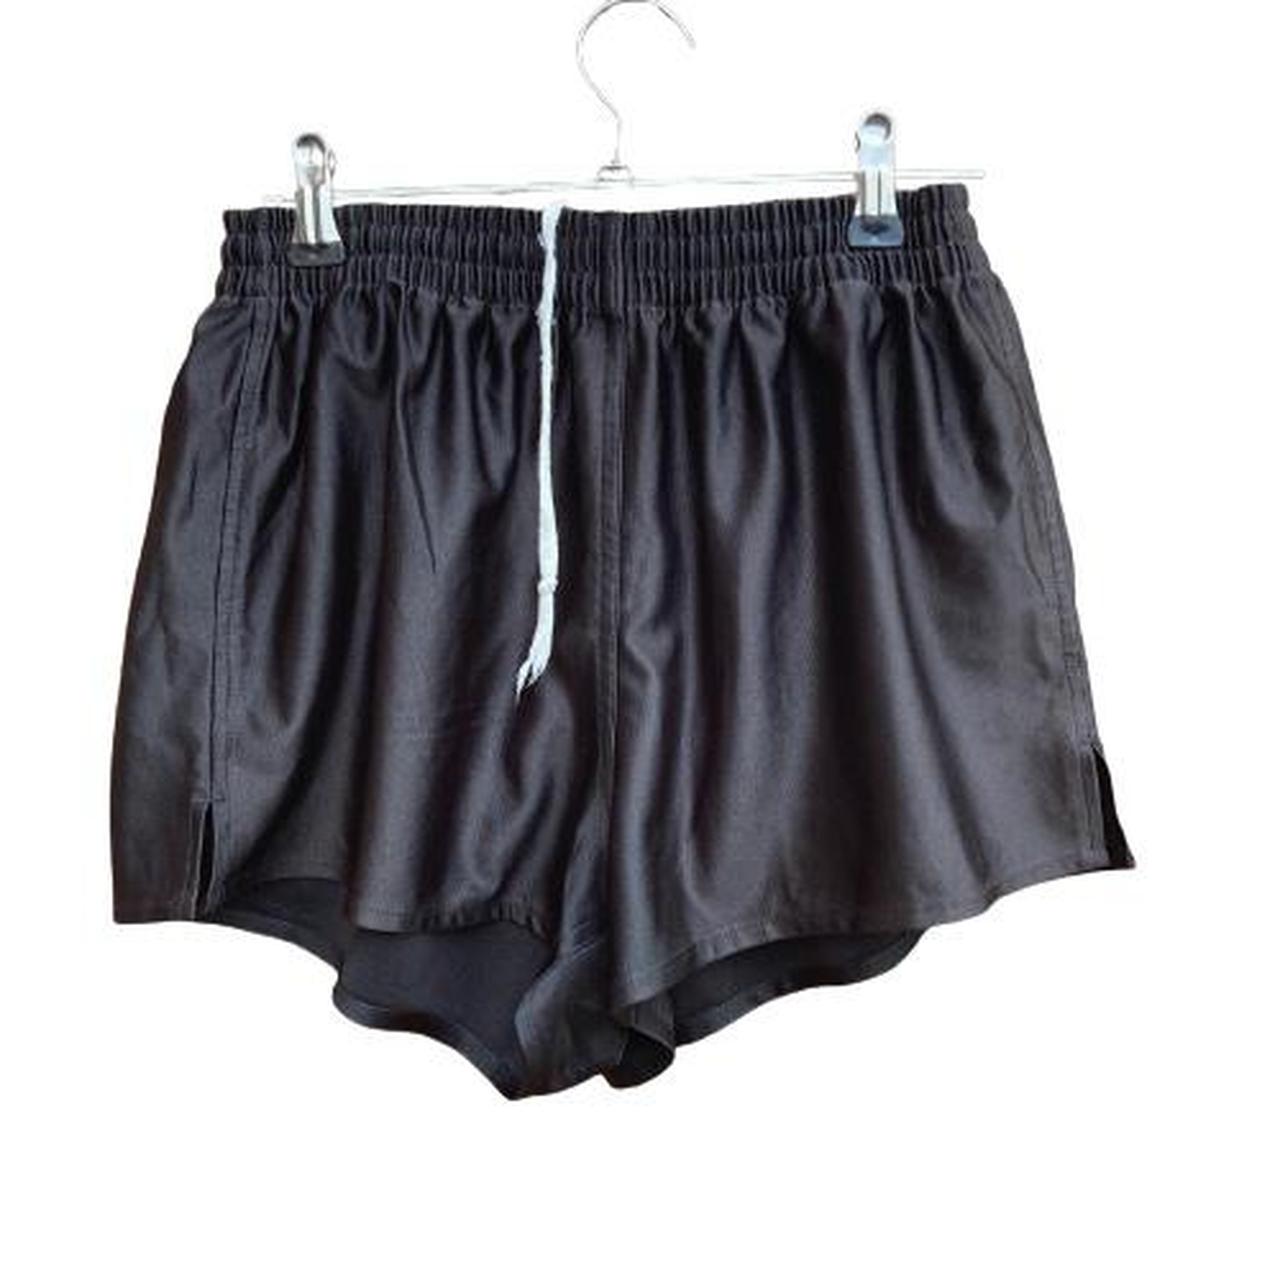 Product Image 3 - Vintage shorts in black by